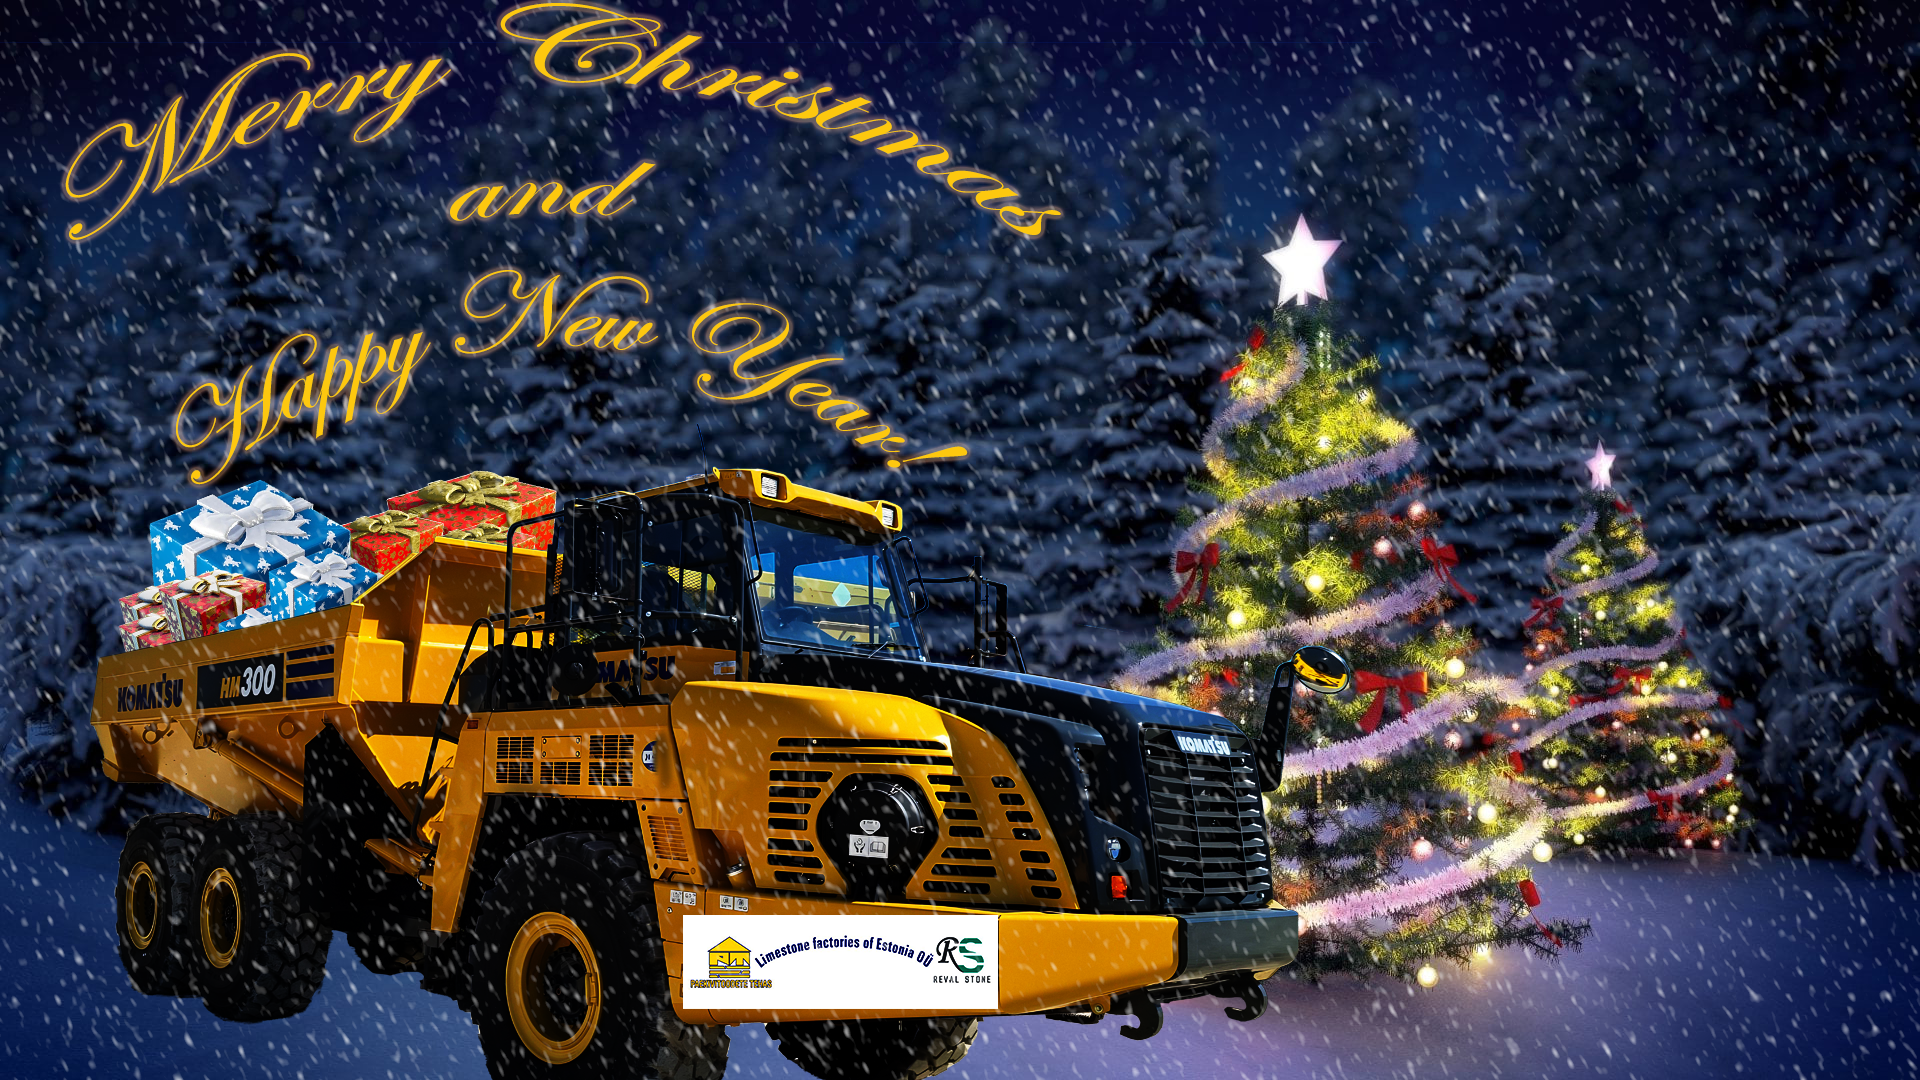 Limestone Factories of Estonia OÜ wishes you a Merry Christmas and a Happy New Year!